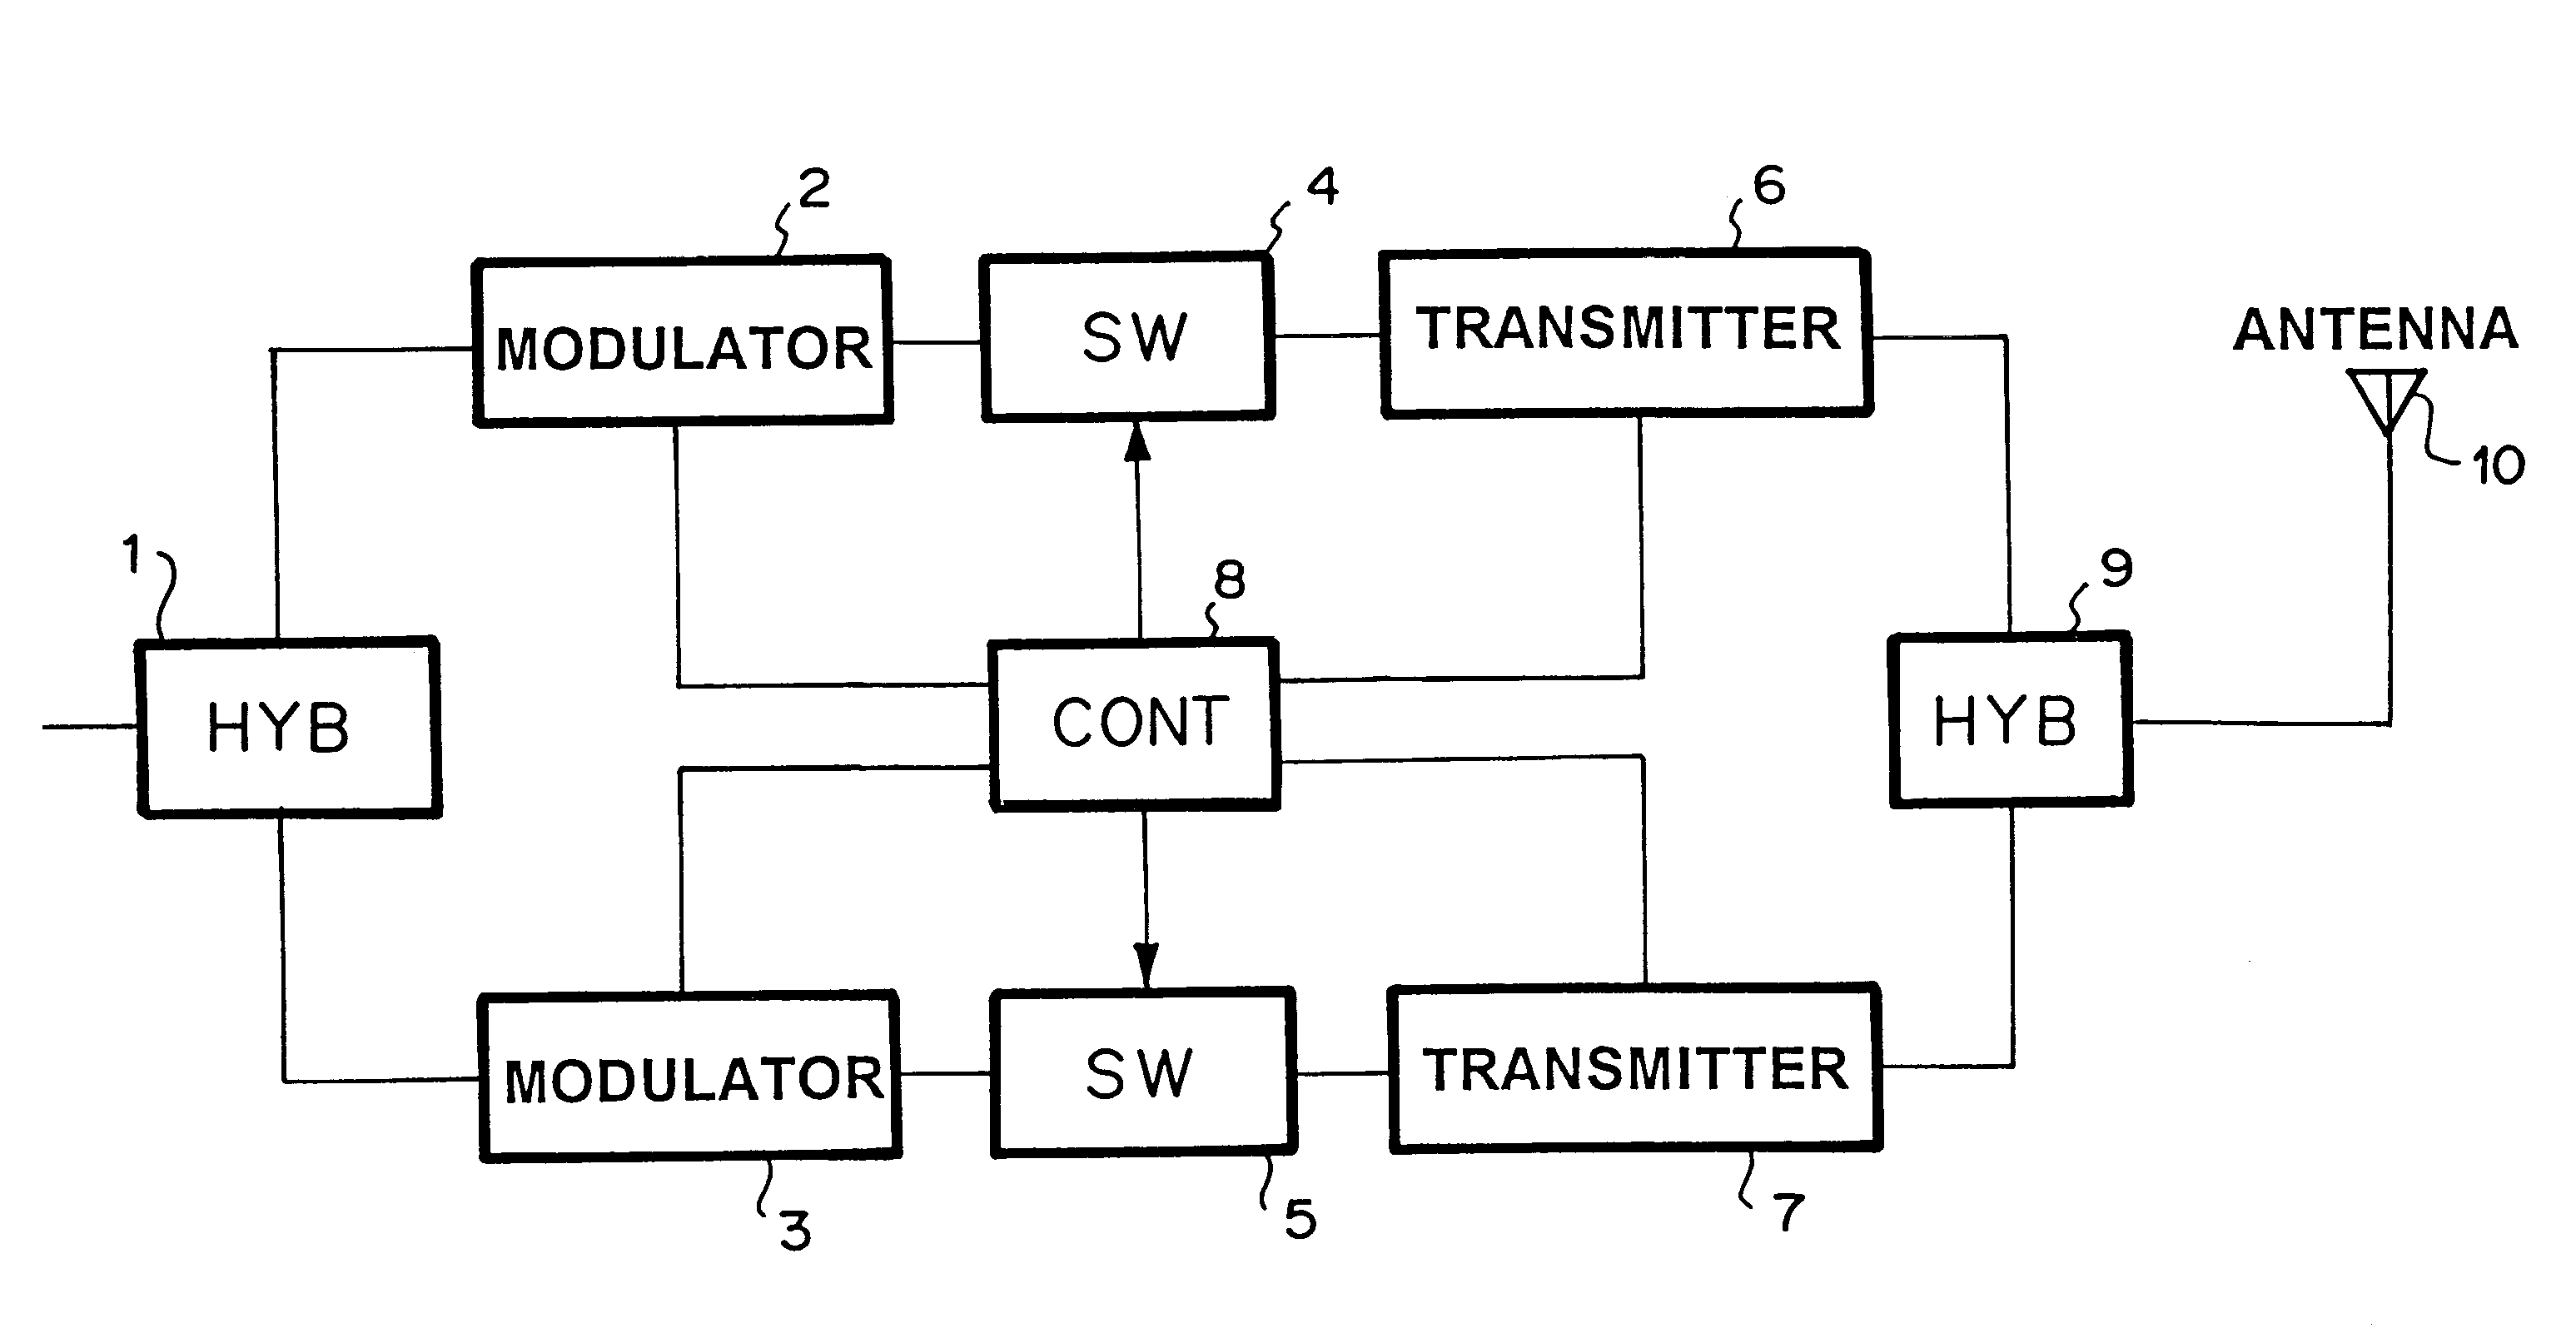 Hot stand-by switching apparatus